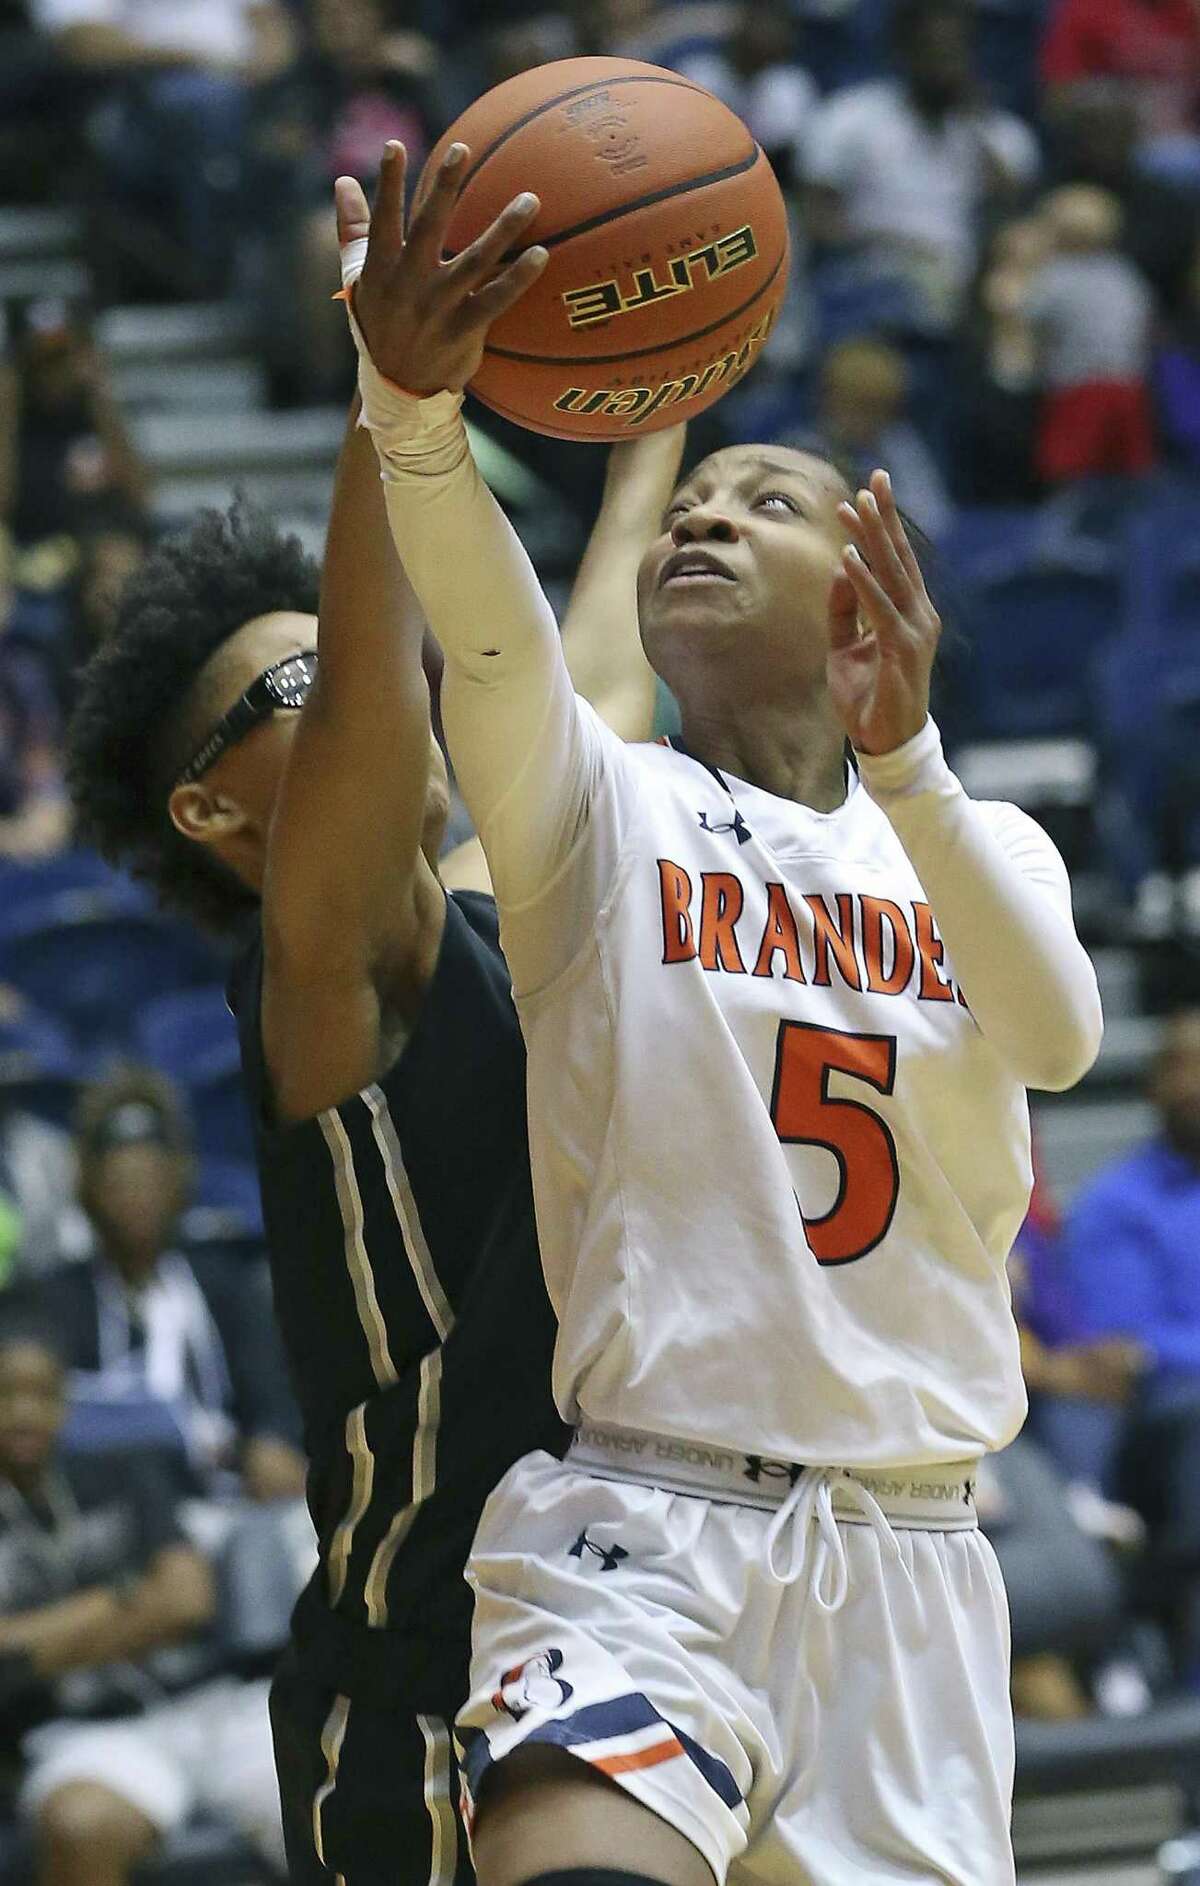 Brandeis’ Gabby Connally has led to the Broncos to the regional tournament round, a program first. She is averaging 25.6 points.